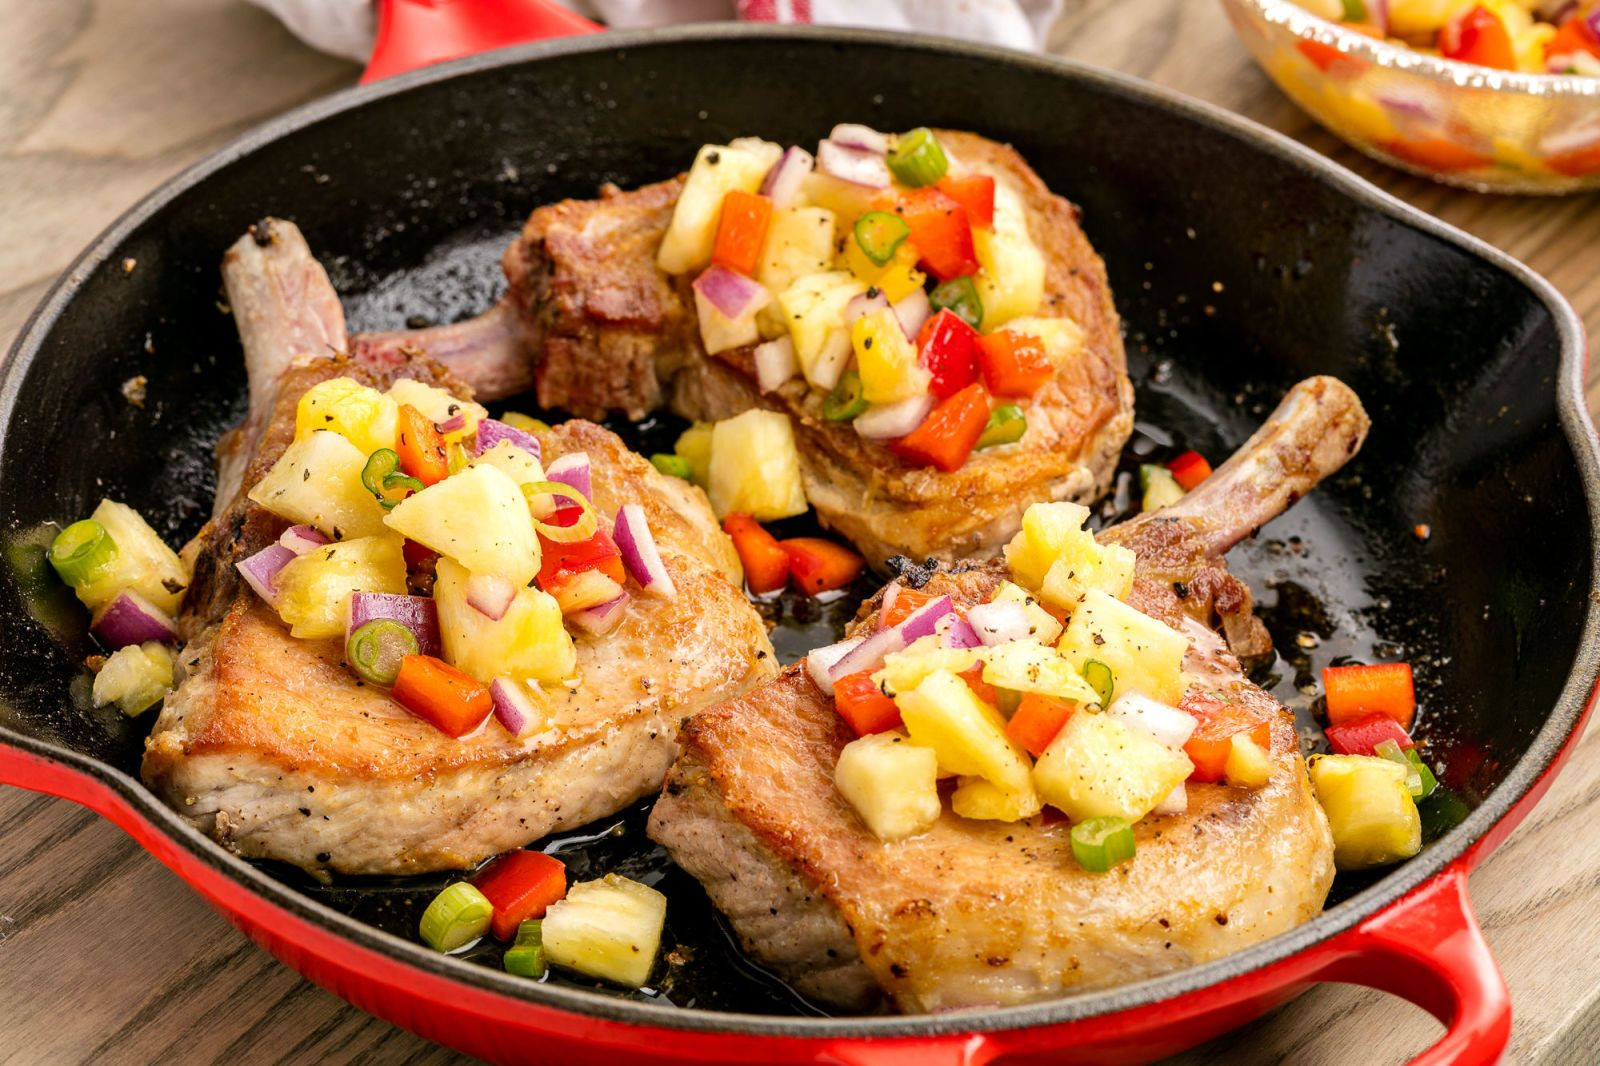 Healthy Way To Cook Pork Chops
 29 New Ways To Cook Pork Chops